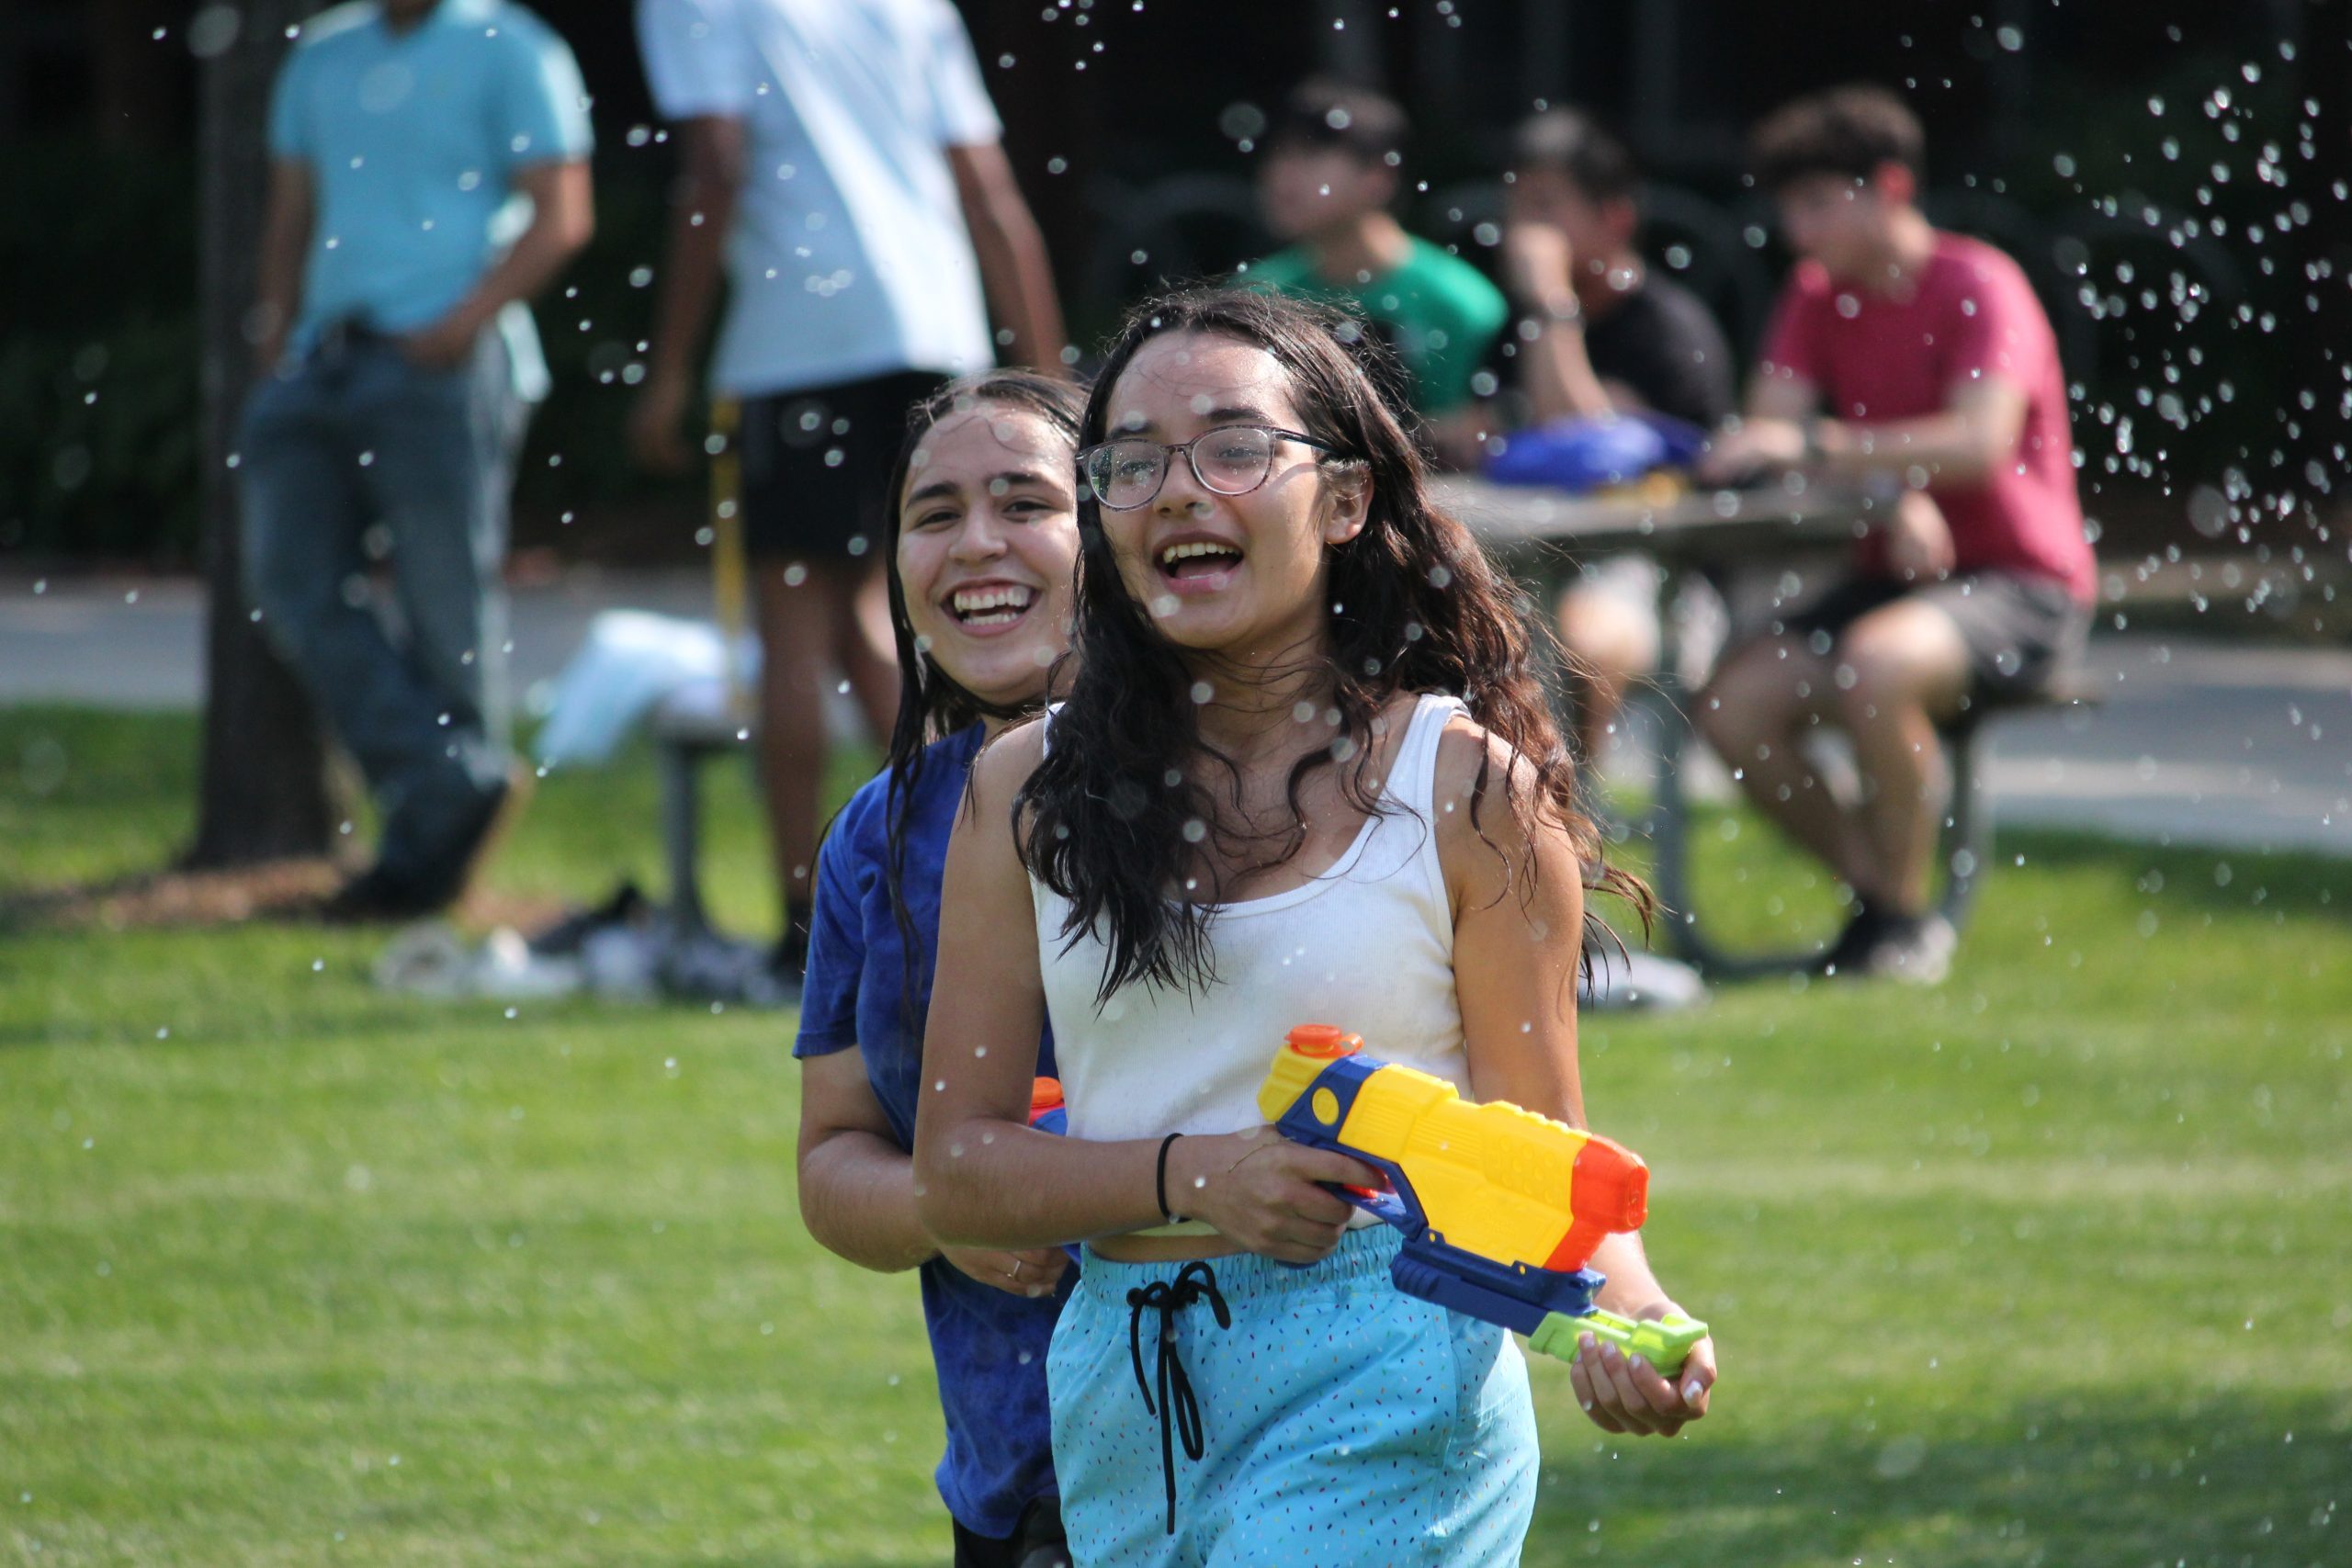 Waist up photo of two pre-college students running and laughing on the grass. The student in front is holding a water gun and water droplets are spraying on the students.